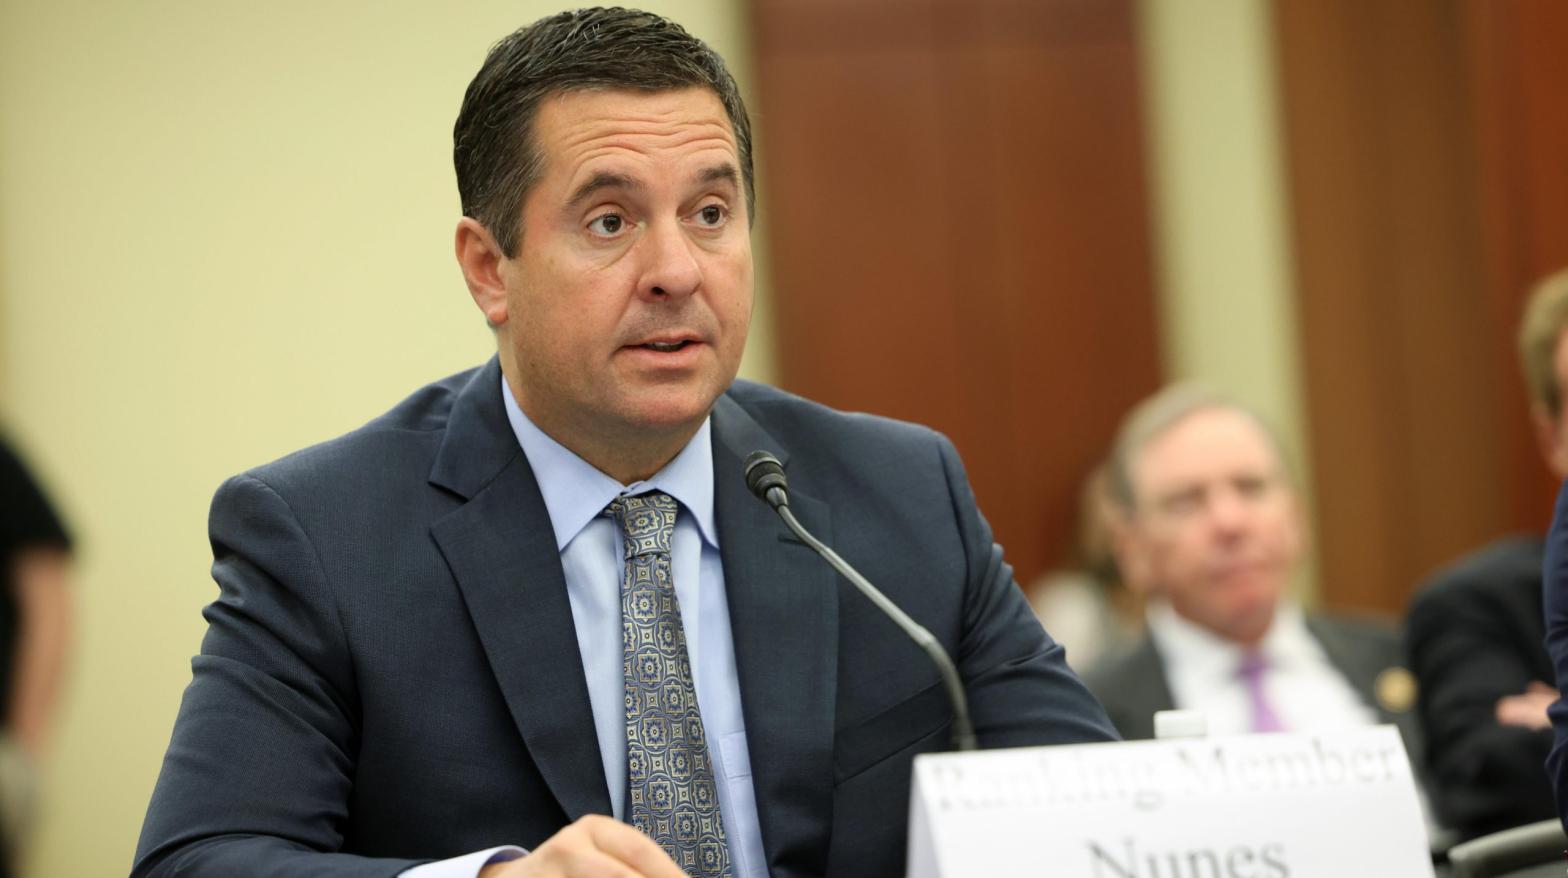 Soon-to-be former representative and future corporate fall guy Devin Nunes, seen here at a GOP forum on the origins of the coronavirus on June 29, 2021 in Washington, DC. (Photo: Kevin Dietsch, Getty Images)